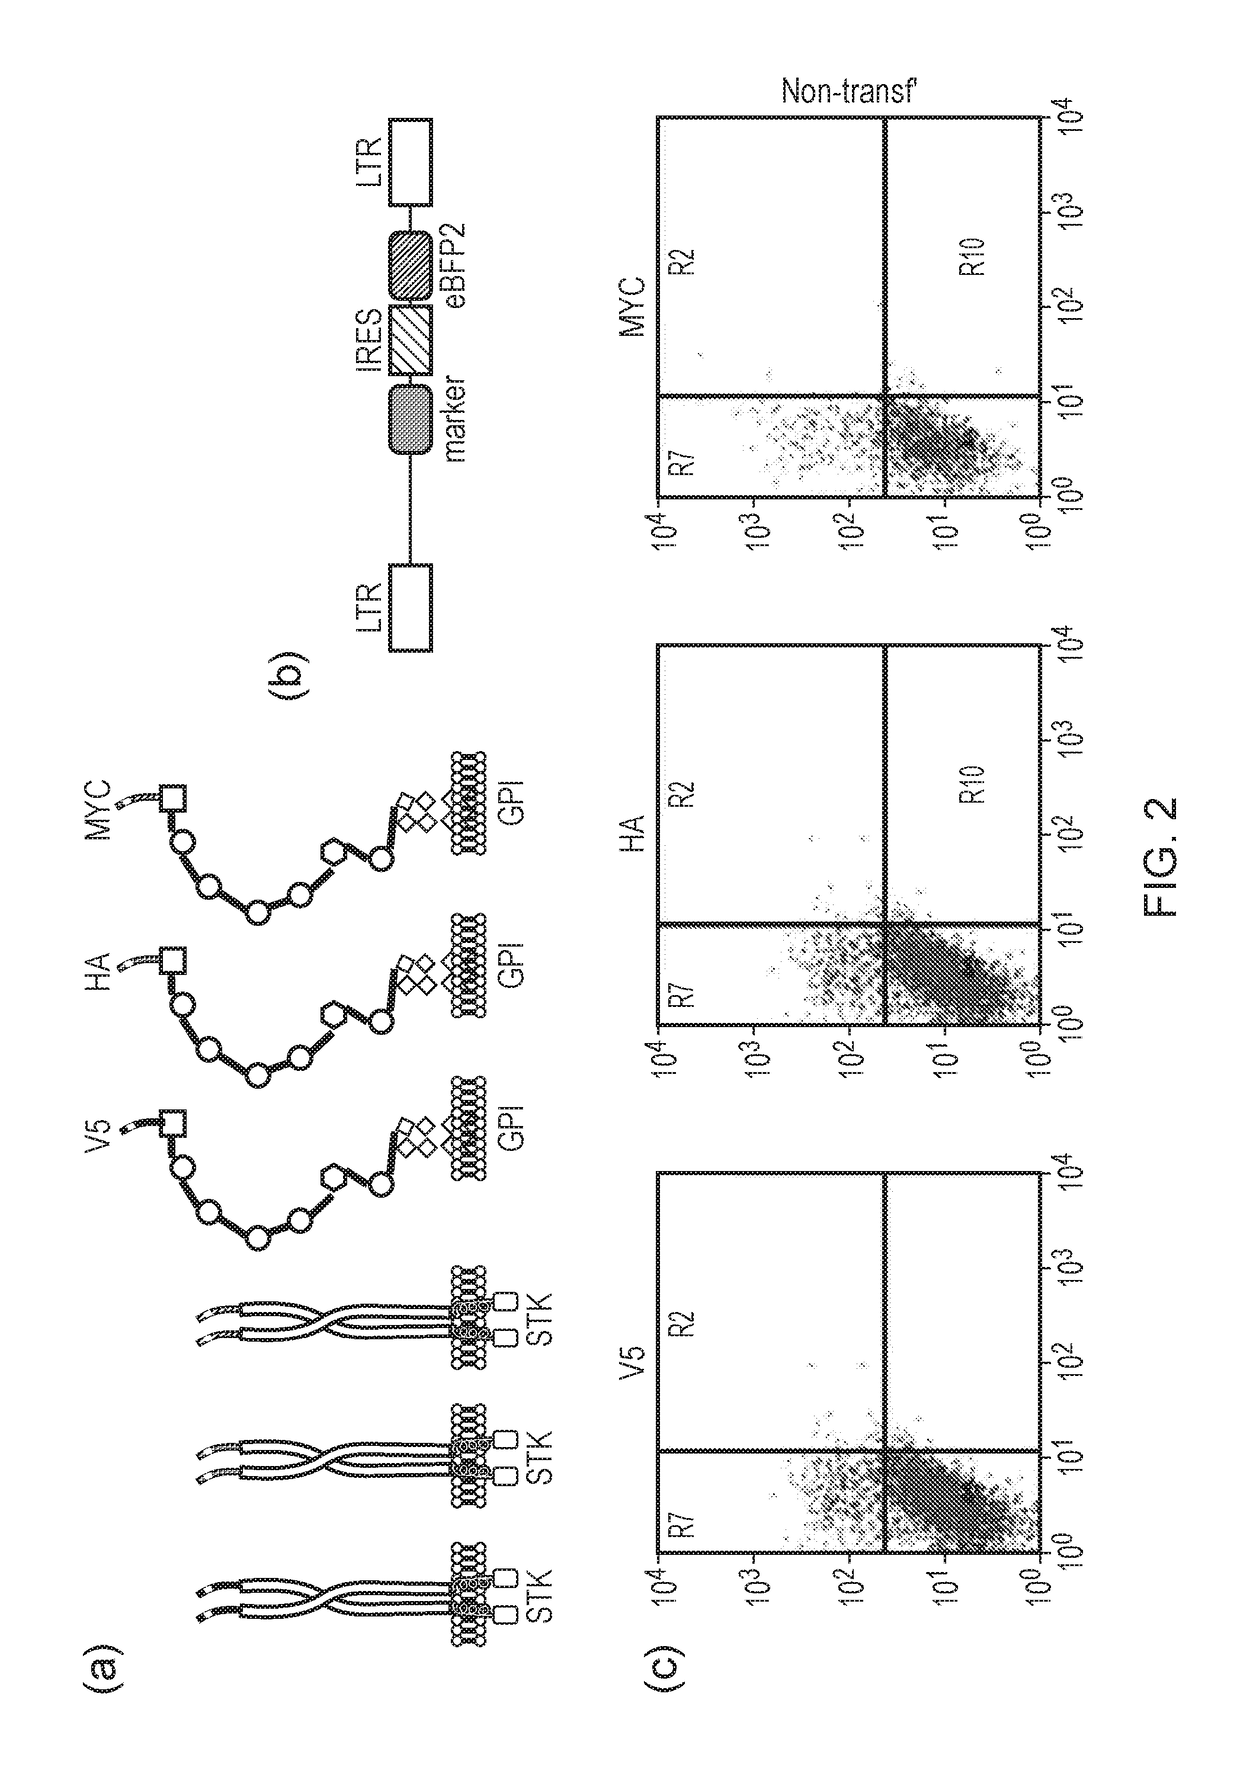 Nucleic acid constructs for producing retroviral vectors